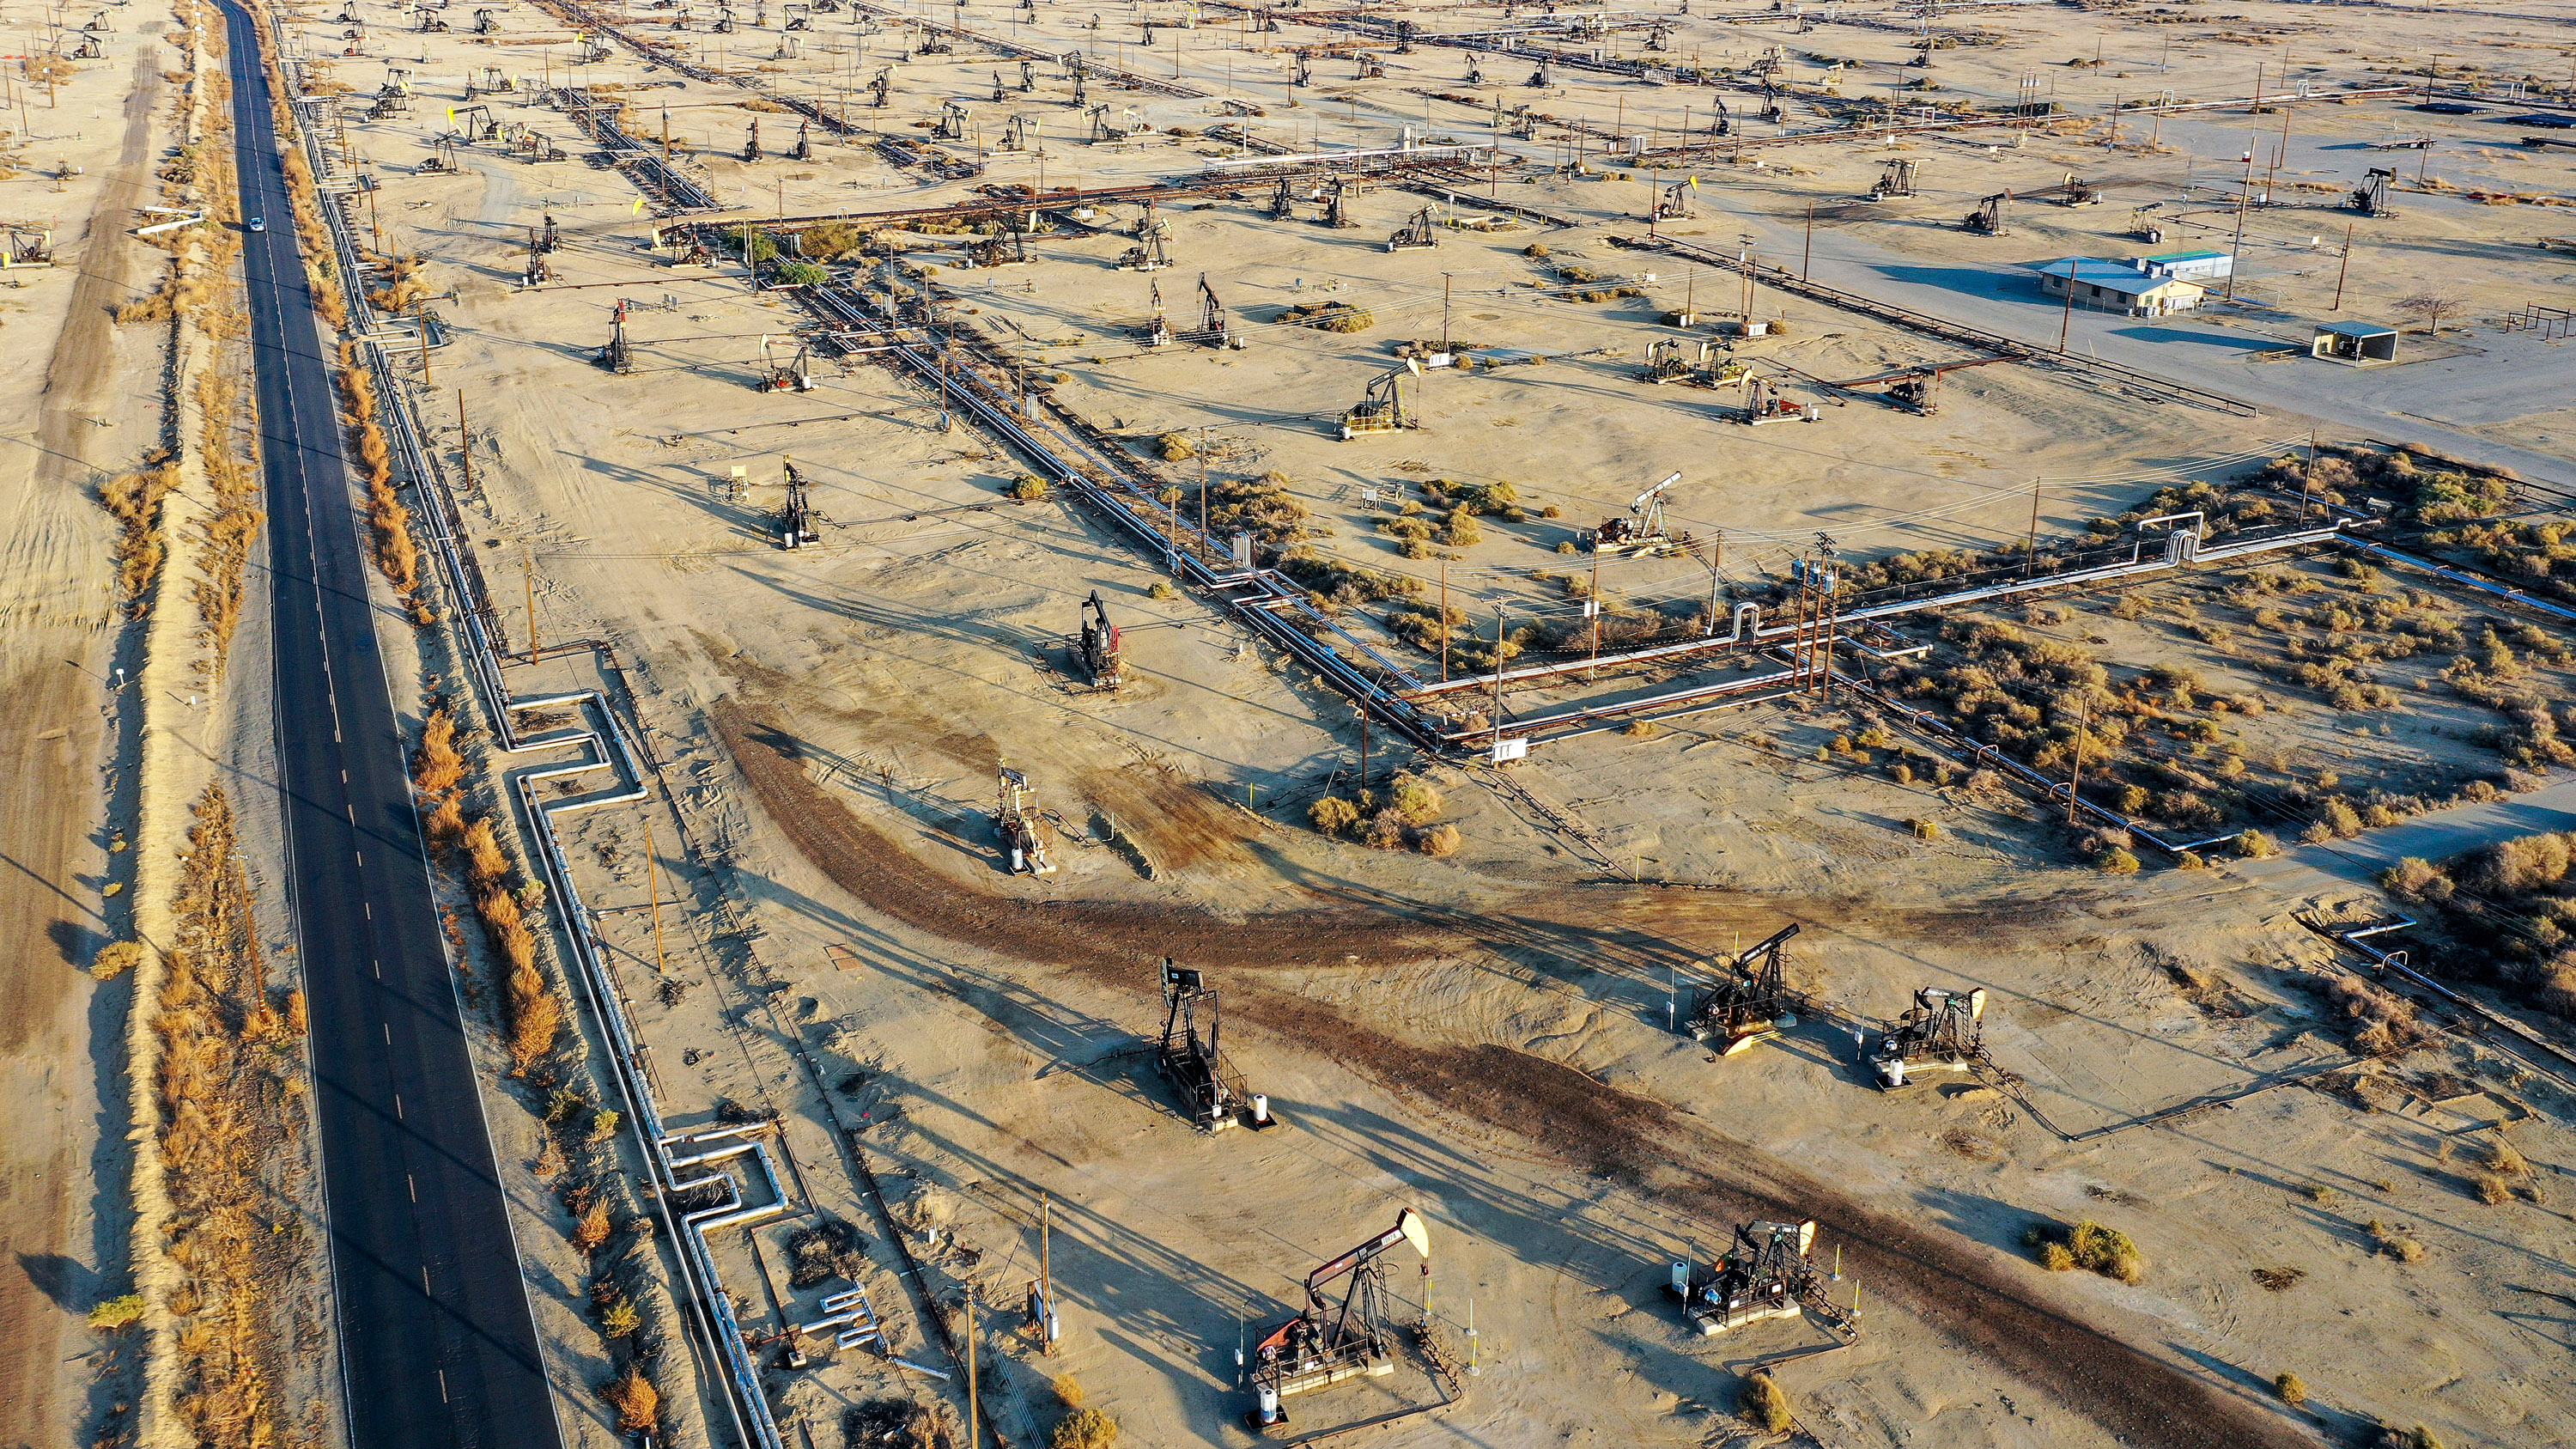 In an aerial view, some pumpjacks operate while others stand idle in the Belridge,CA oil field